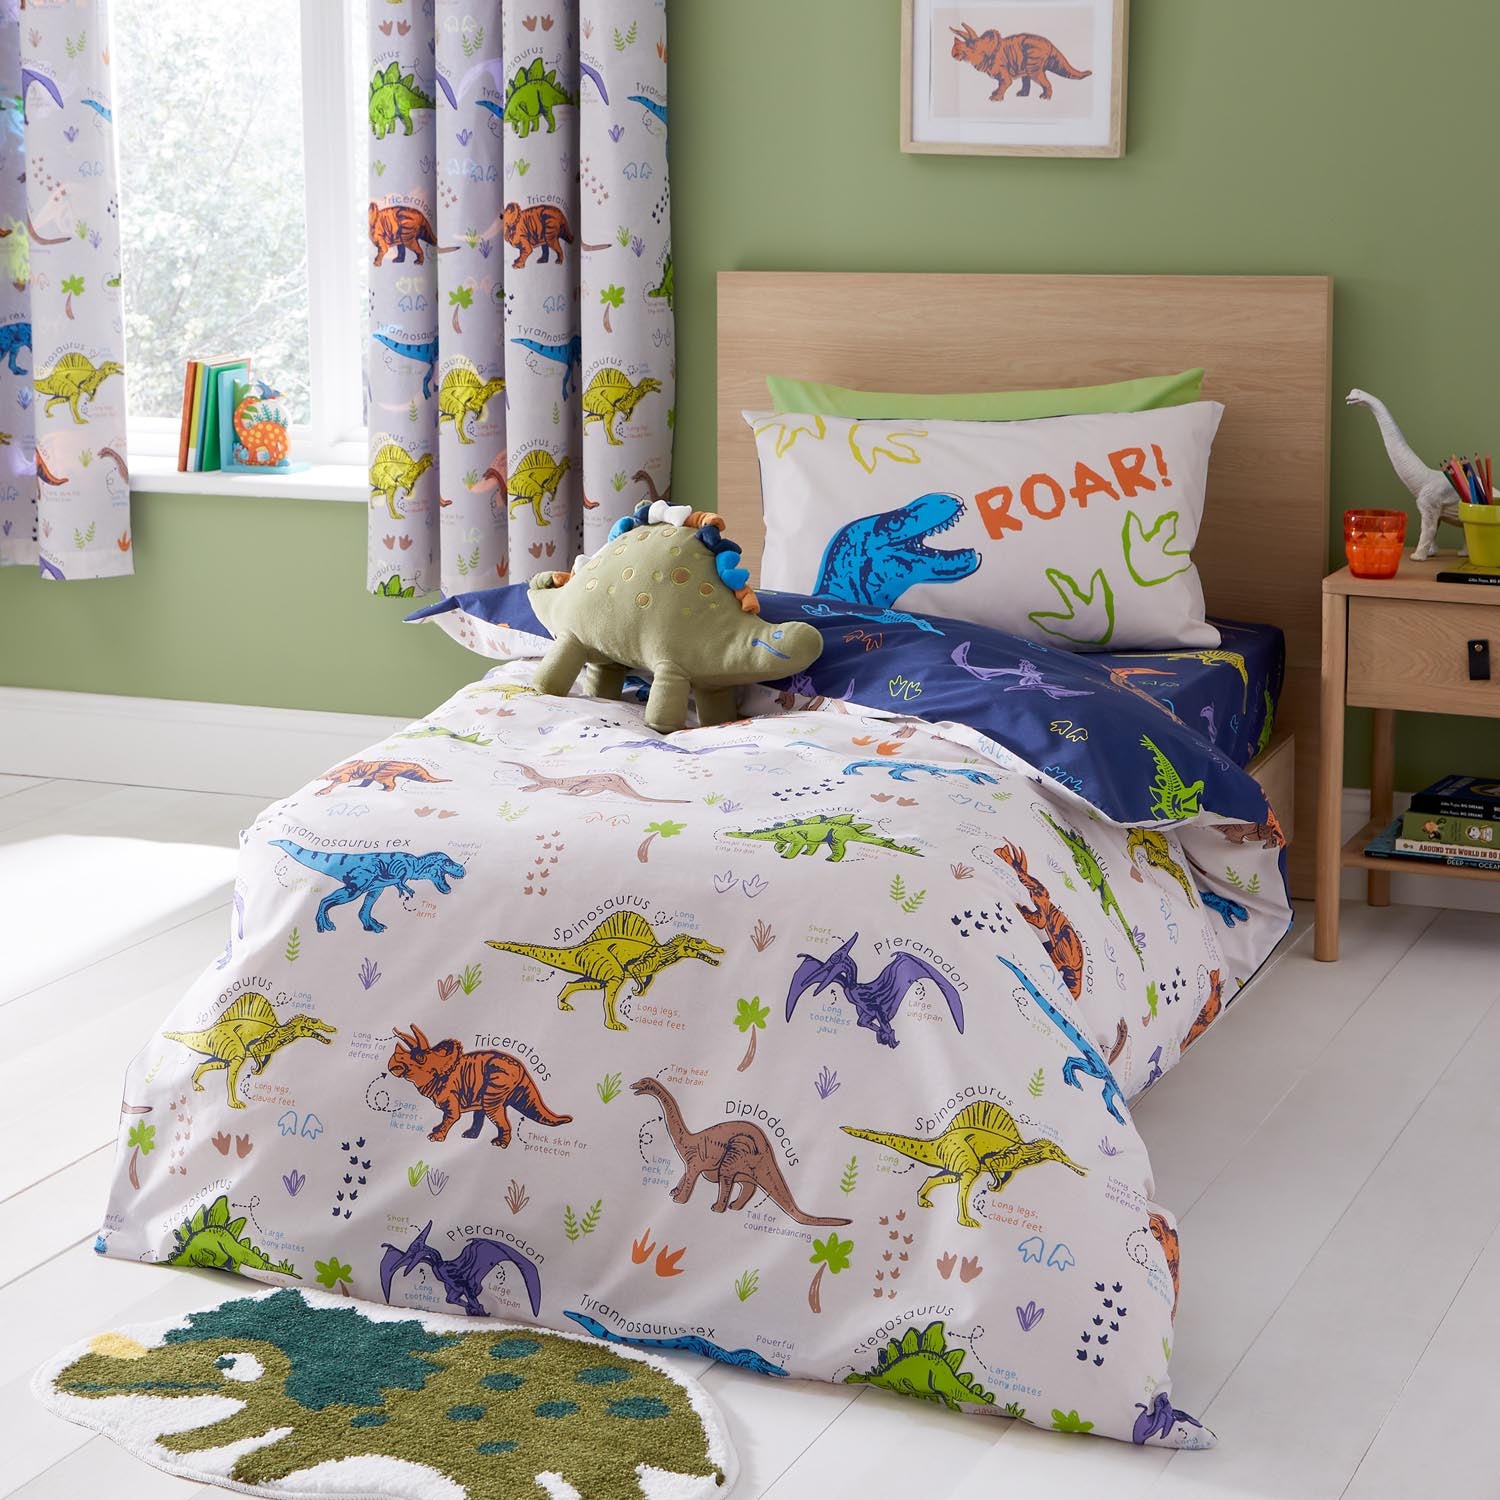 The Home Luxury Collection Dinosaurs Duvet Cover Set 1 Shaws Department Stores